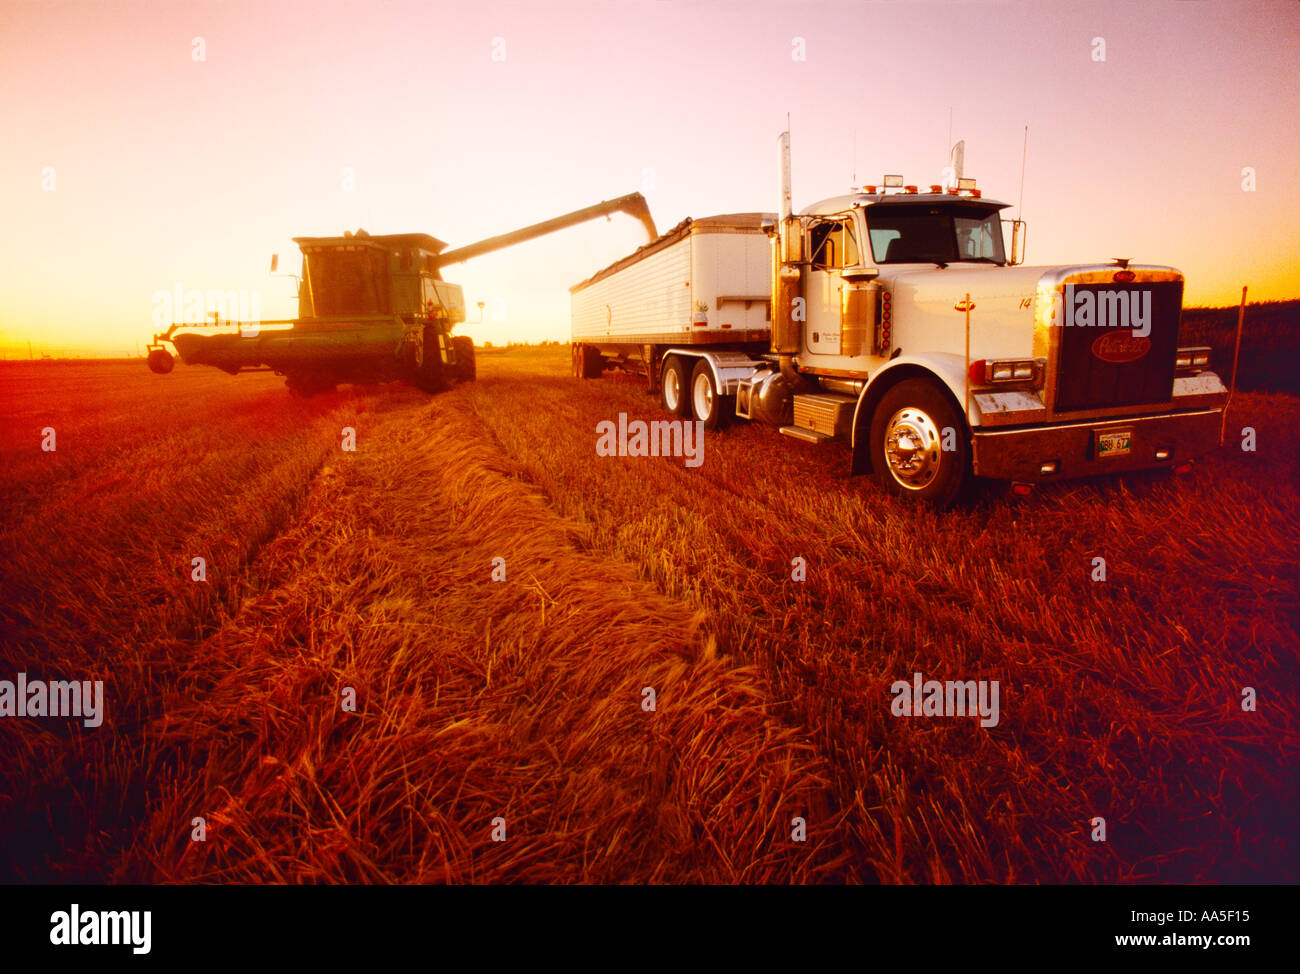 Agriculture - A combine unloads freshly harvested barley into a grain truck at sunset / near Niverville, Manitoba, Canada. Stock Photo